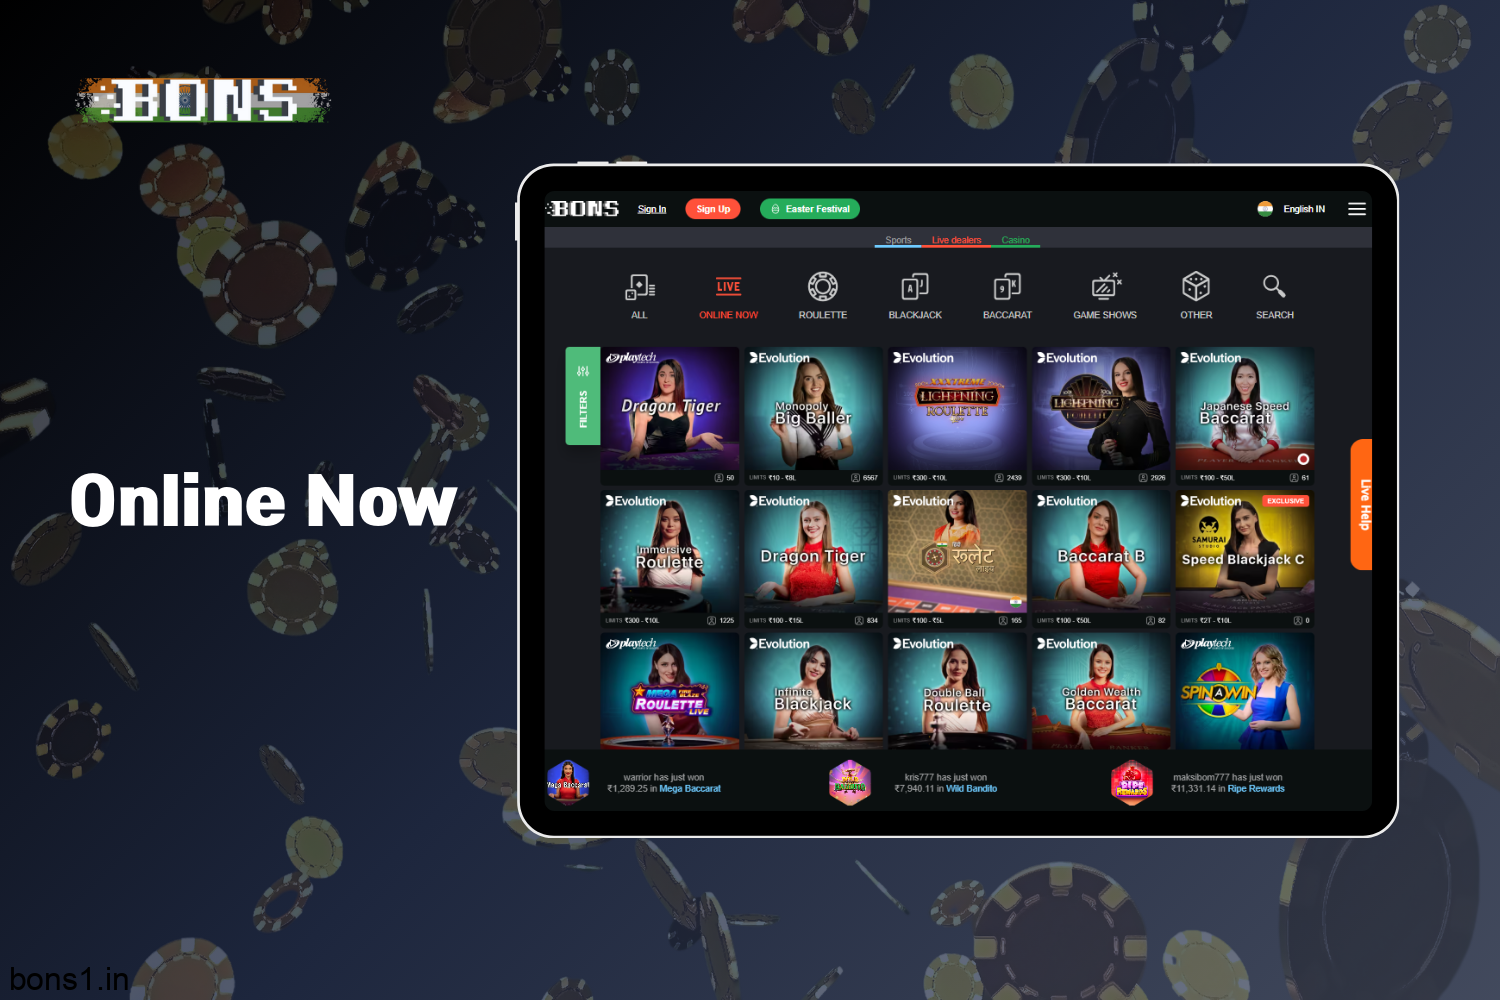 Bons Casino in the Live Casino section has a great selection of Online Now games for players from India